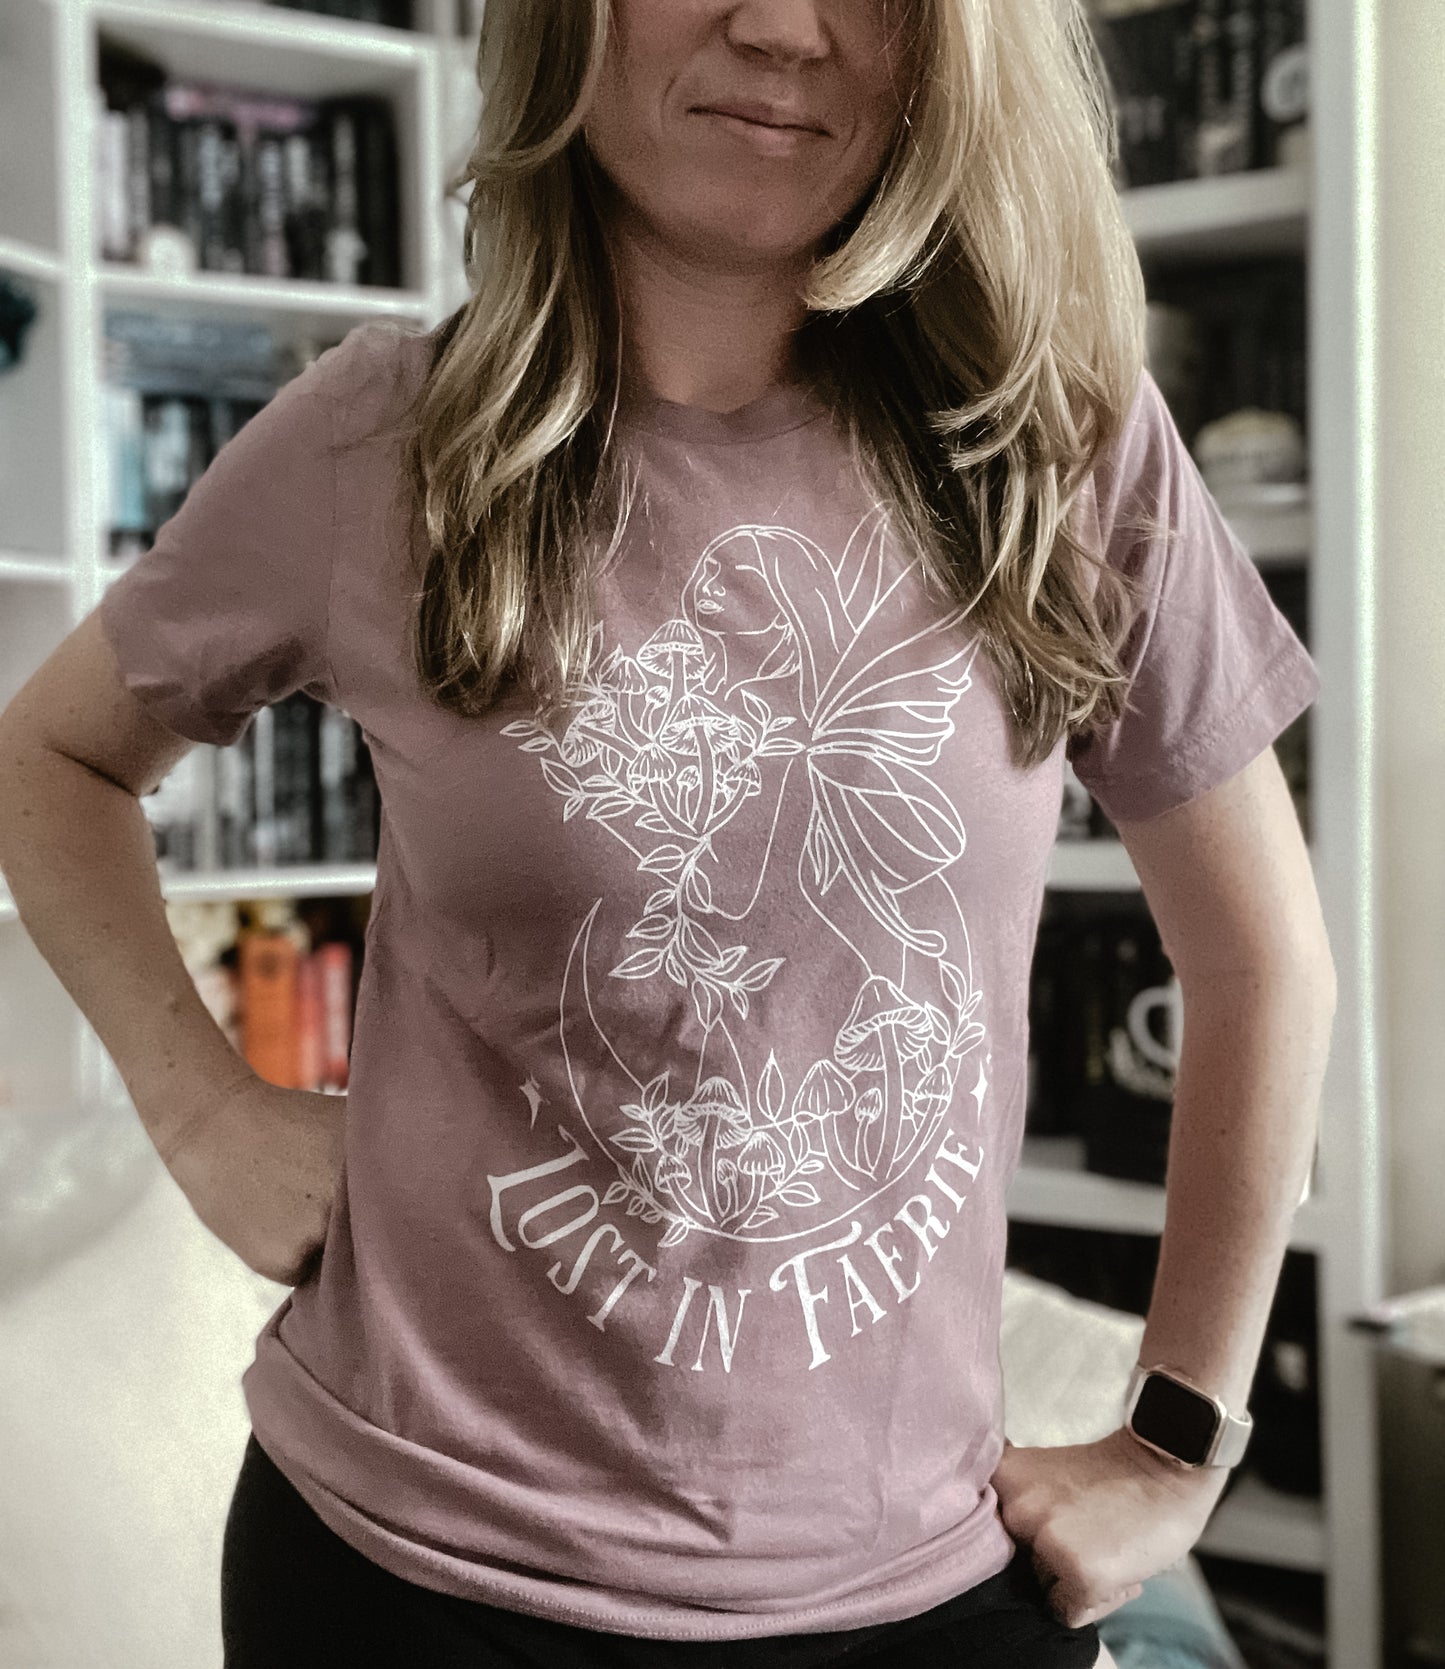 Lost in Faerie Unisex t-shirt - Dusty Rose with Light Design